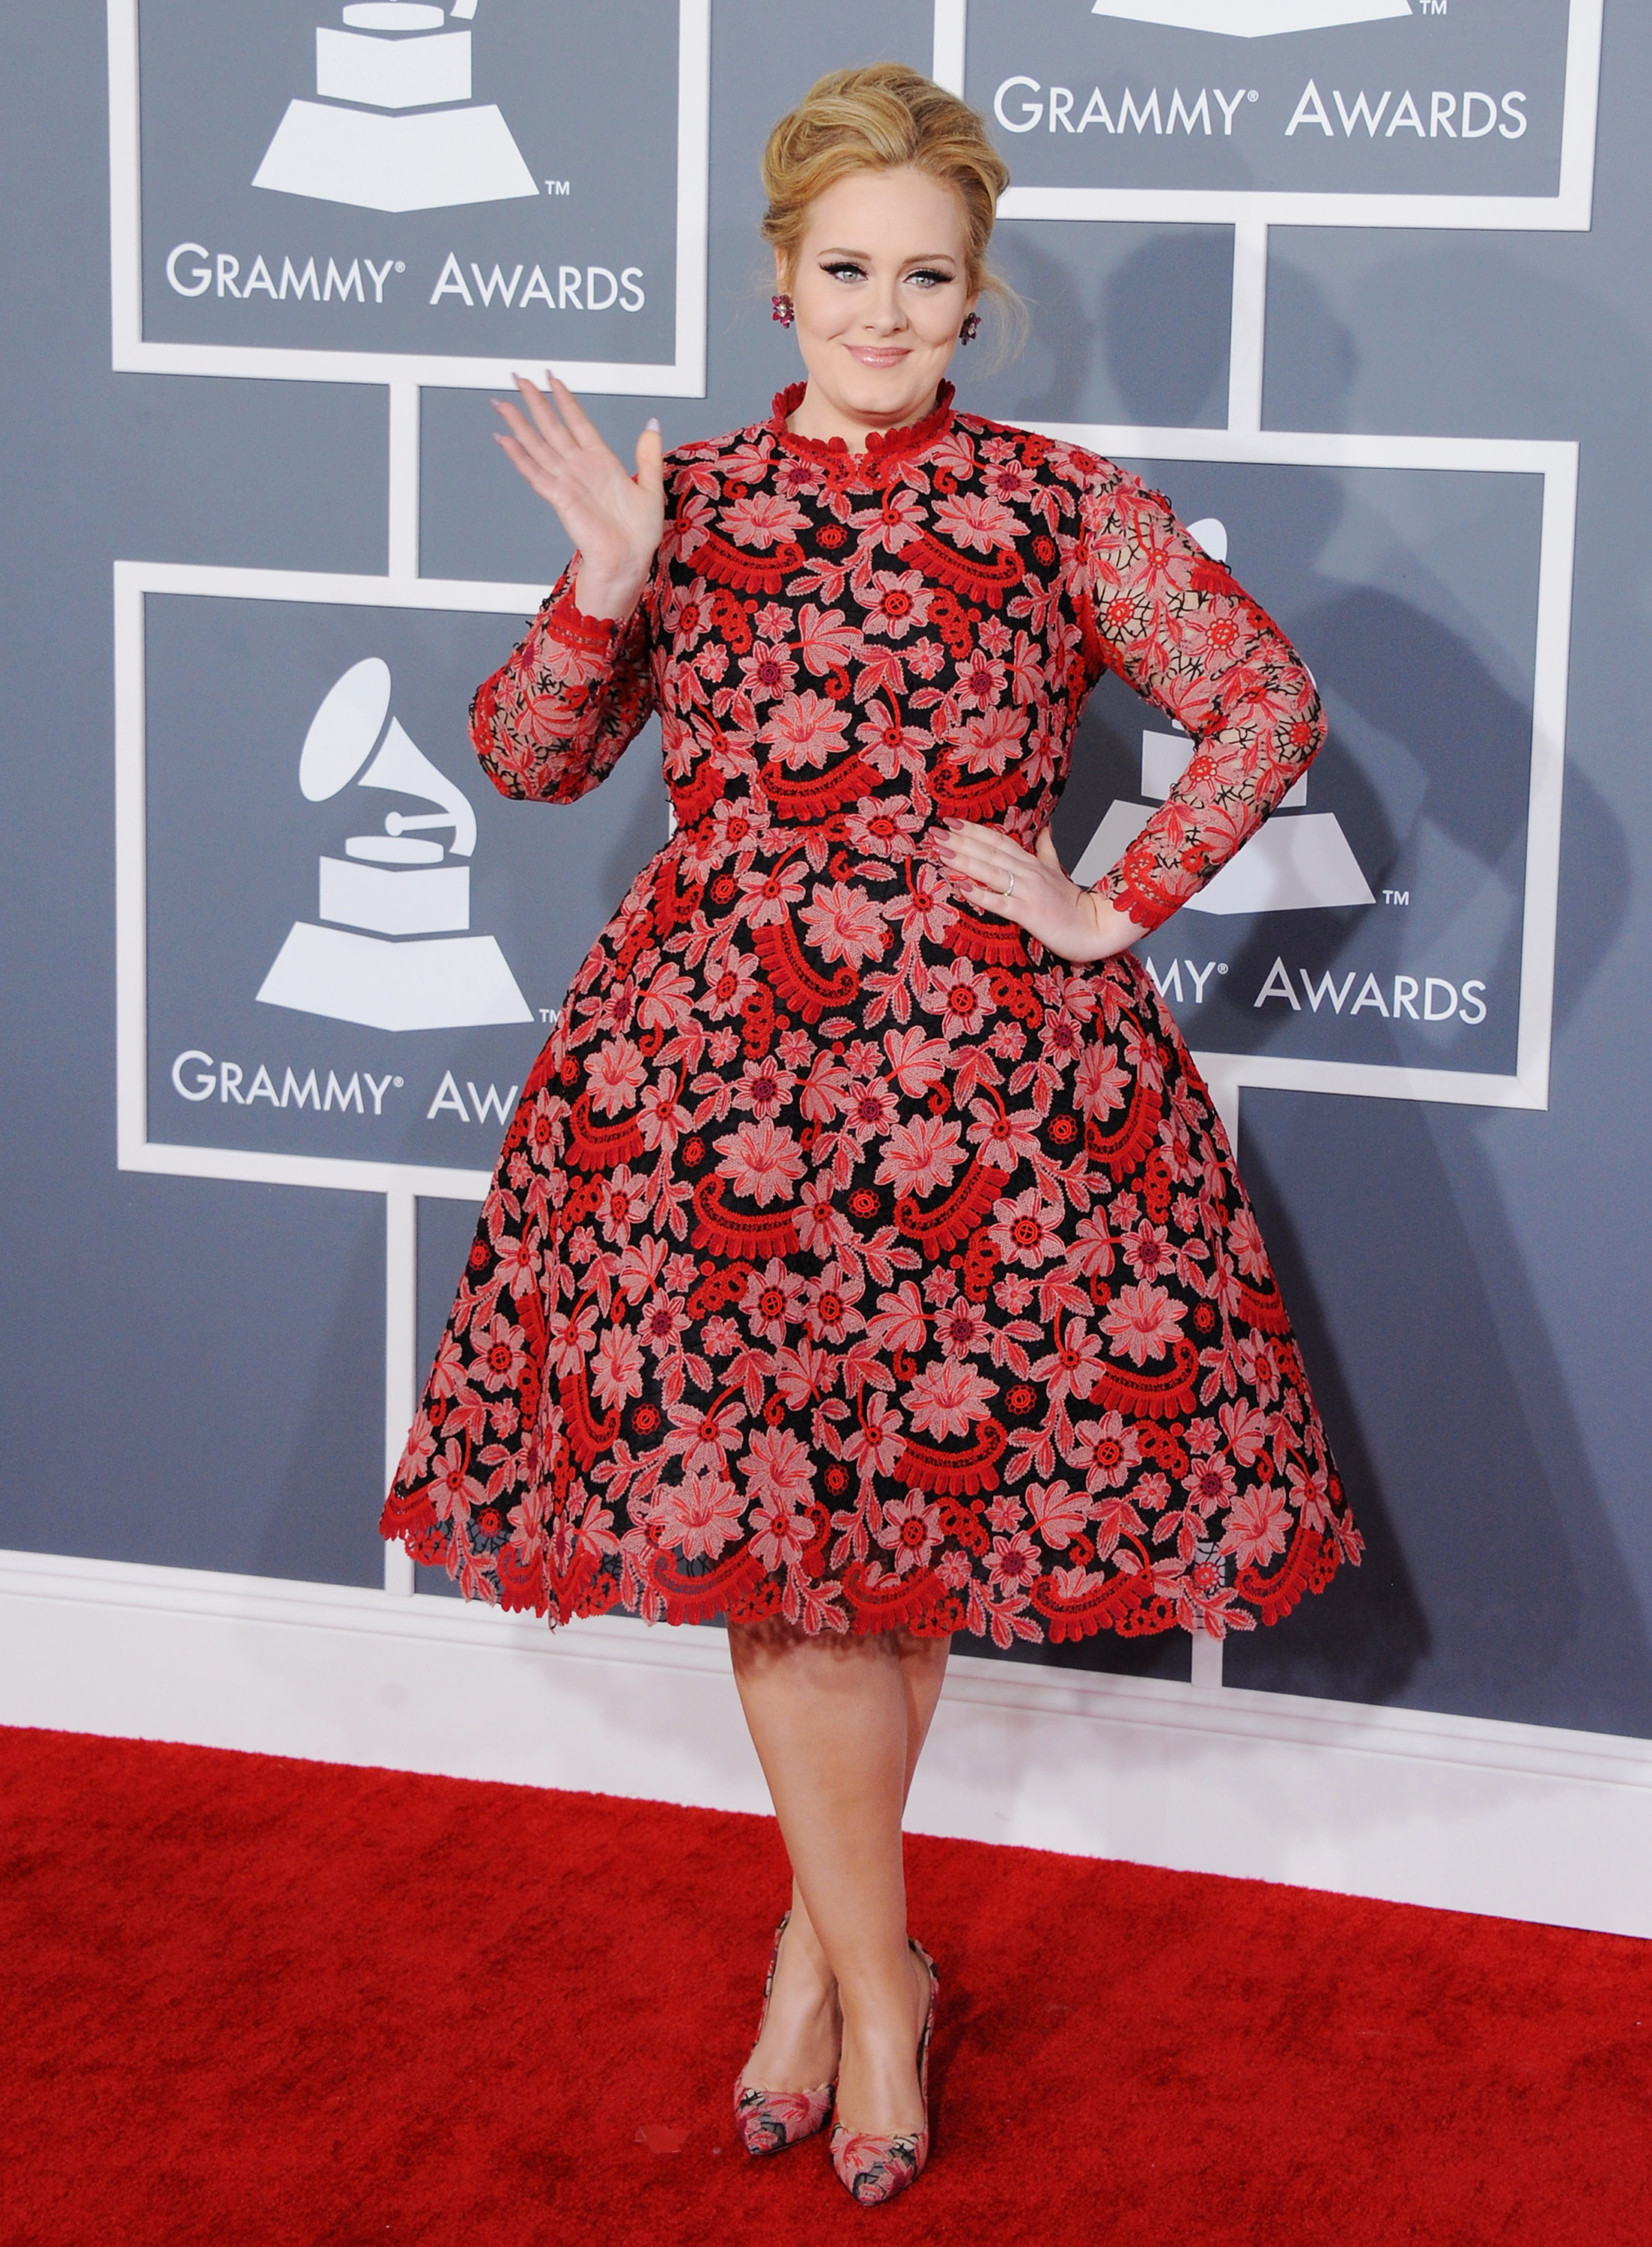 LOS ANGELES, CA - FEBRUARY 10: Singer Adele arrives at The 55th Annual GRAMMY Awards at Staples Center on February 10, 2013 in Los Angeles, California. (Photo by Jon Kopaloff/FilmMagic)